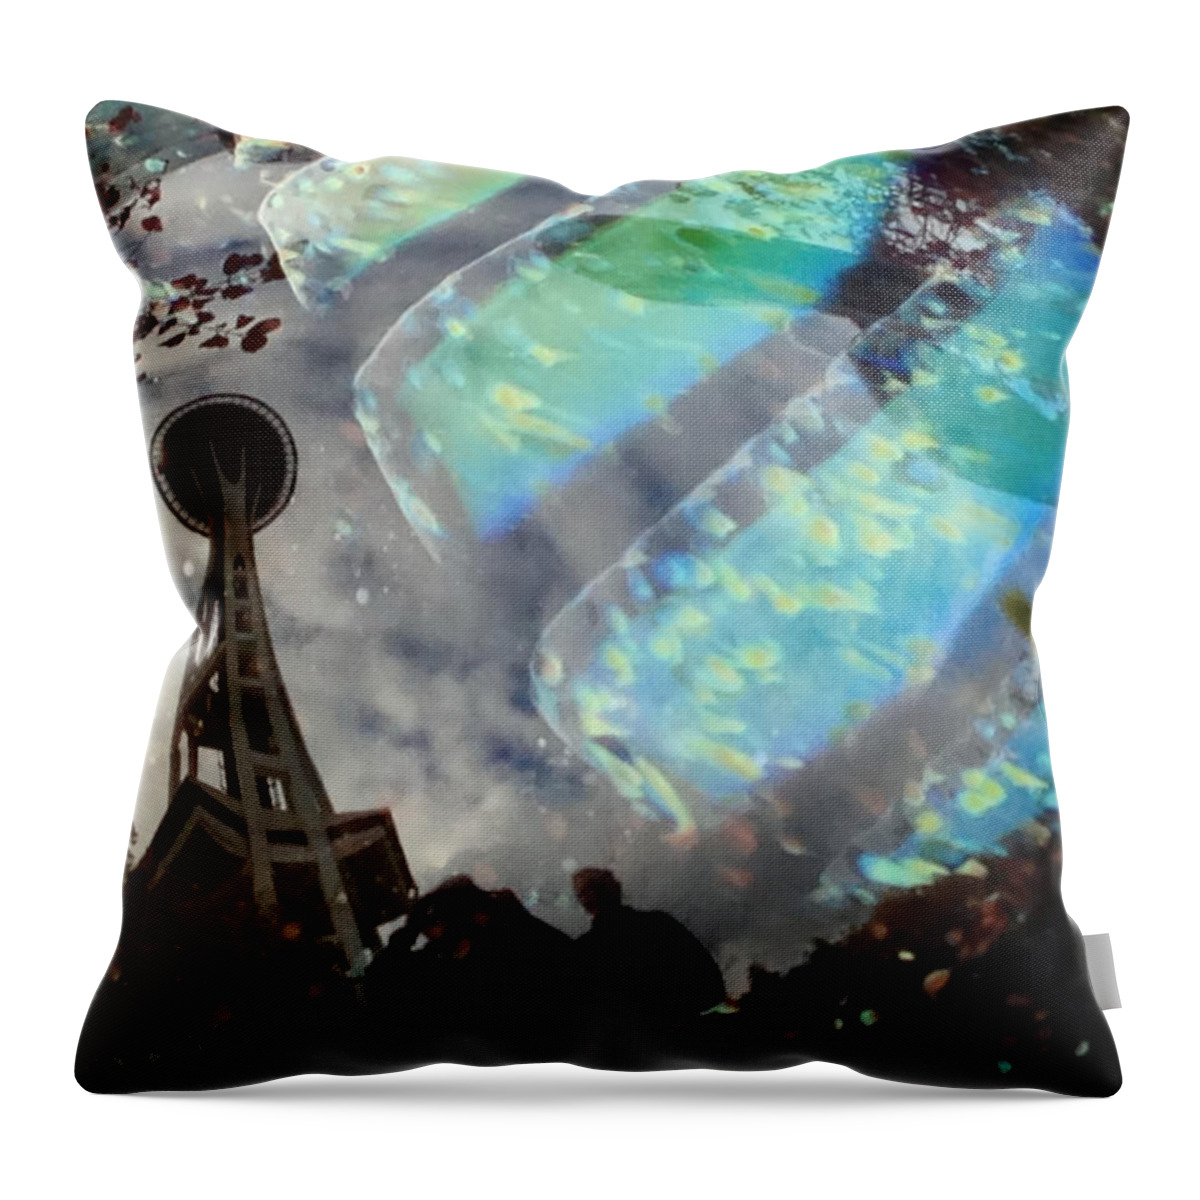 Black Throw Pillow featuring the painting Reflections in Glass by Juliette Becker